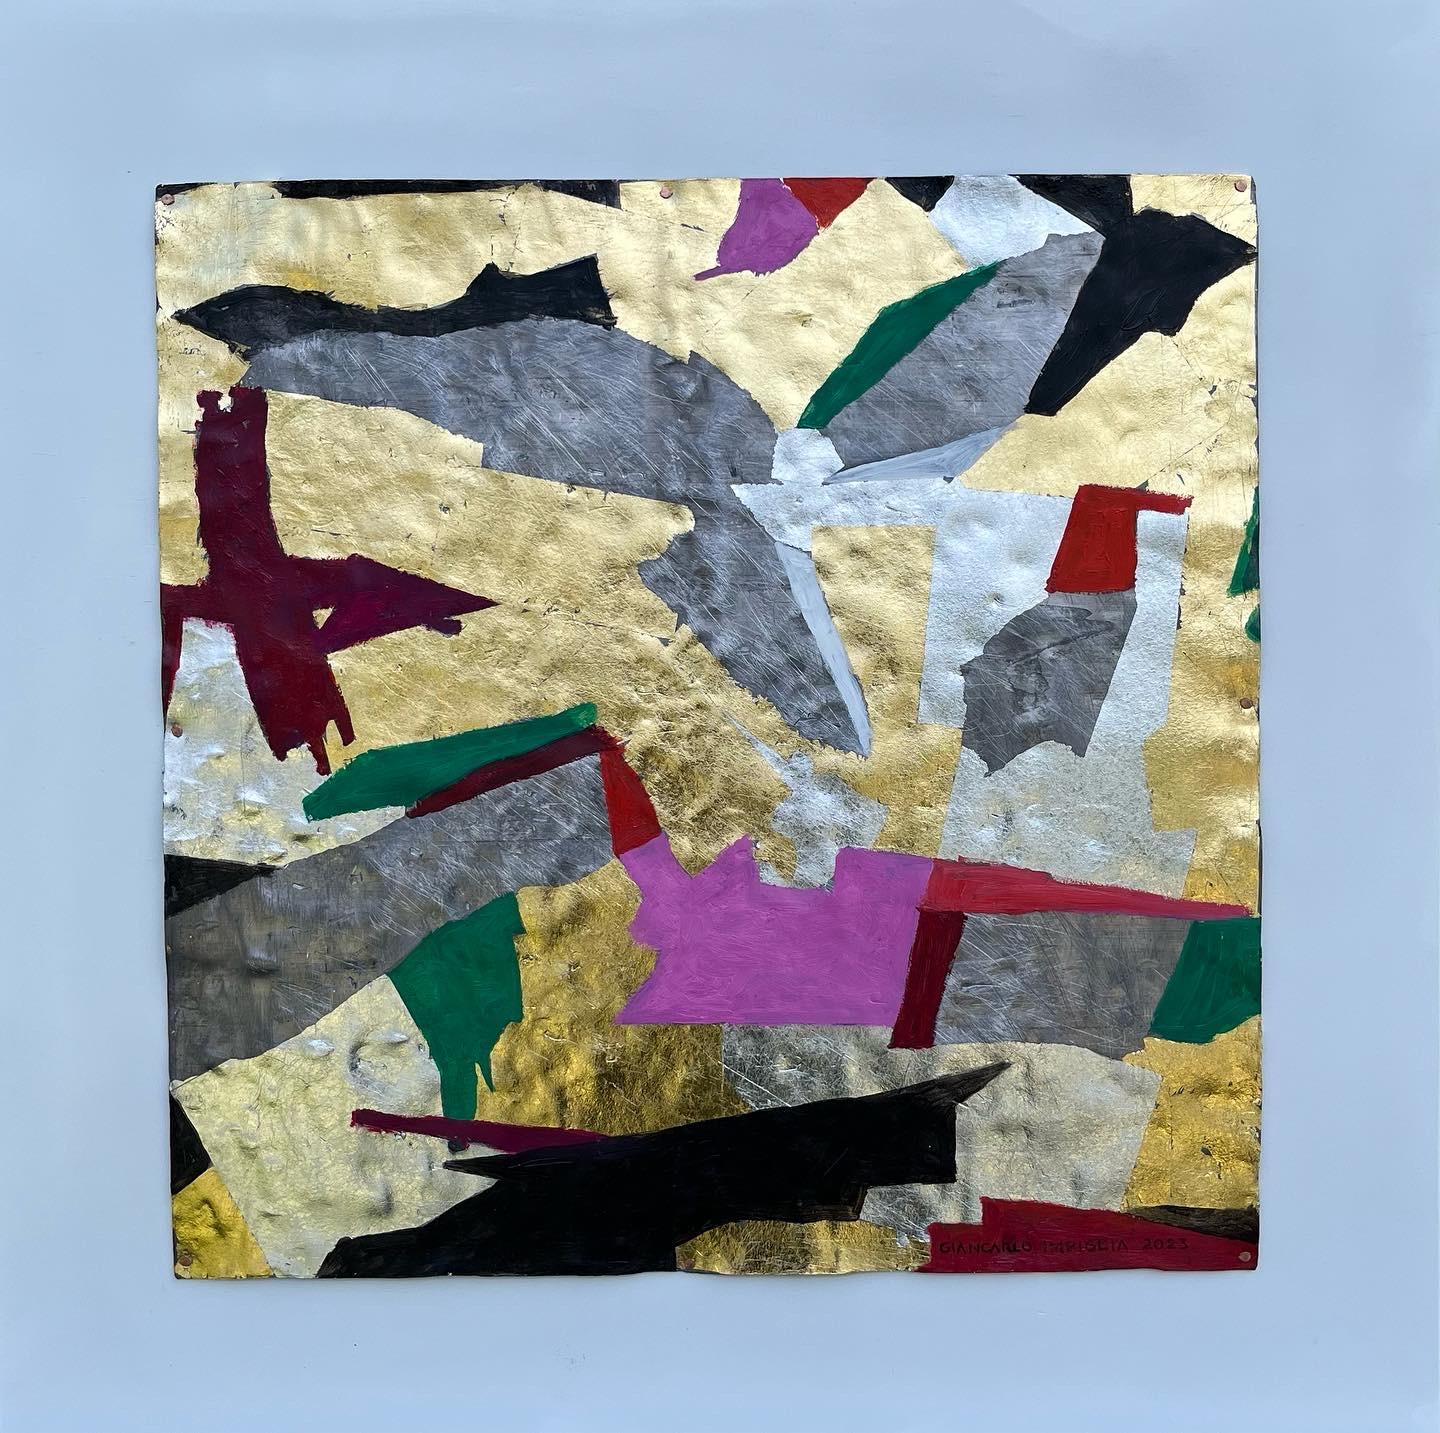 An incredible abstract work on lead by the indelible Giancarlo Impiglia. 

Born in Rome, Impiglia moved to New York in the 70s, where he established a signature style on the shoulders of Futurism and Cubism, his technical skill underpinning his